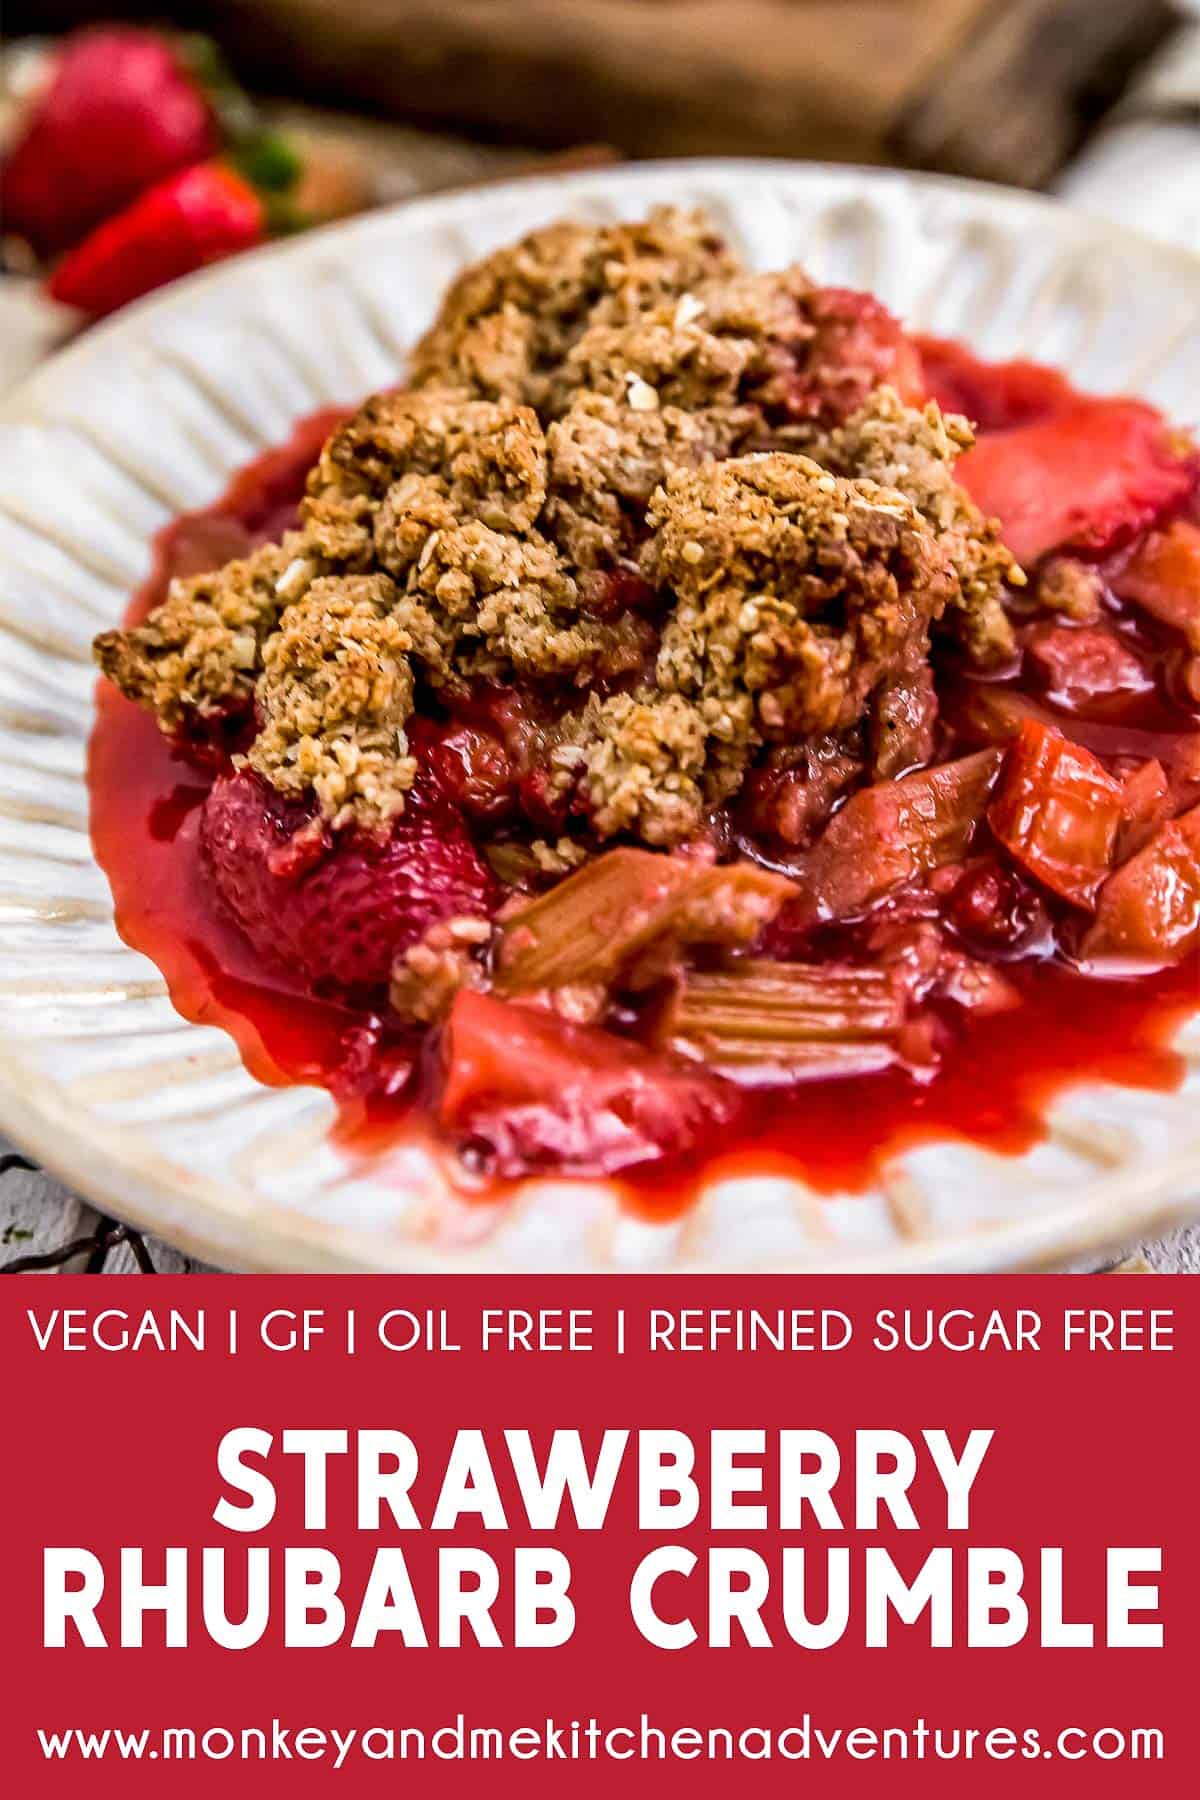 Strawberry Rhubarb Crumble with text description